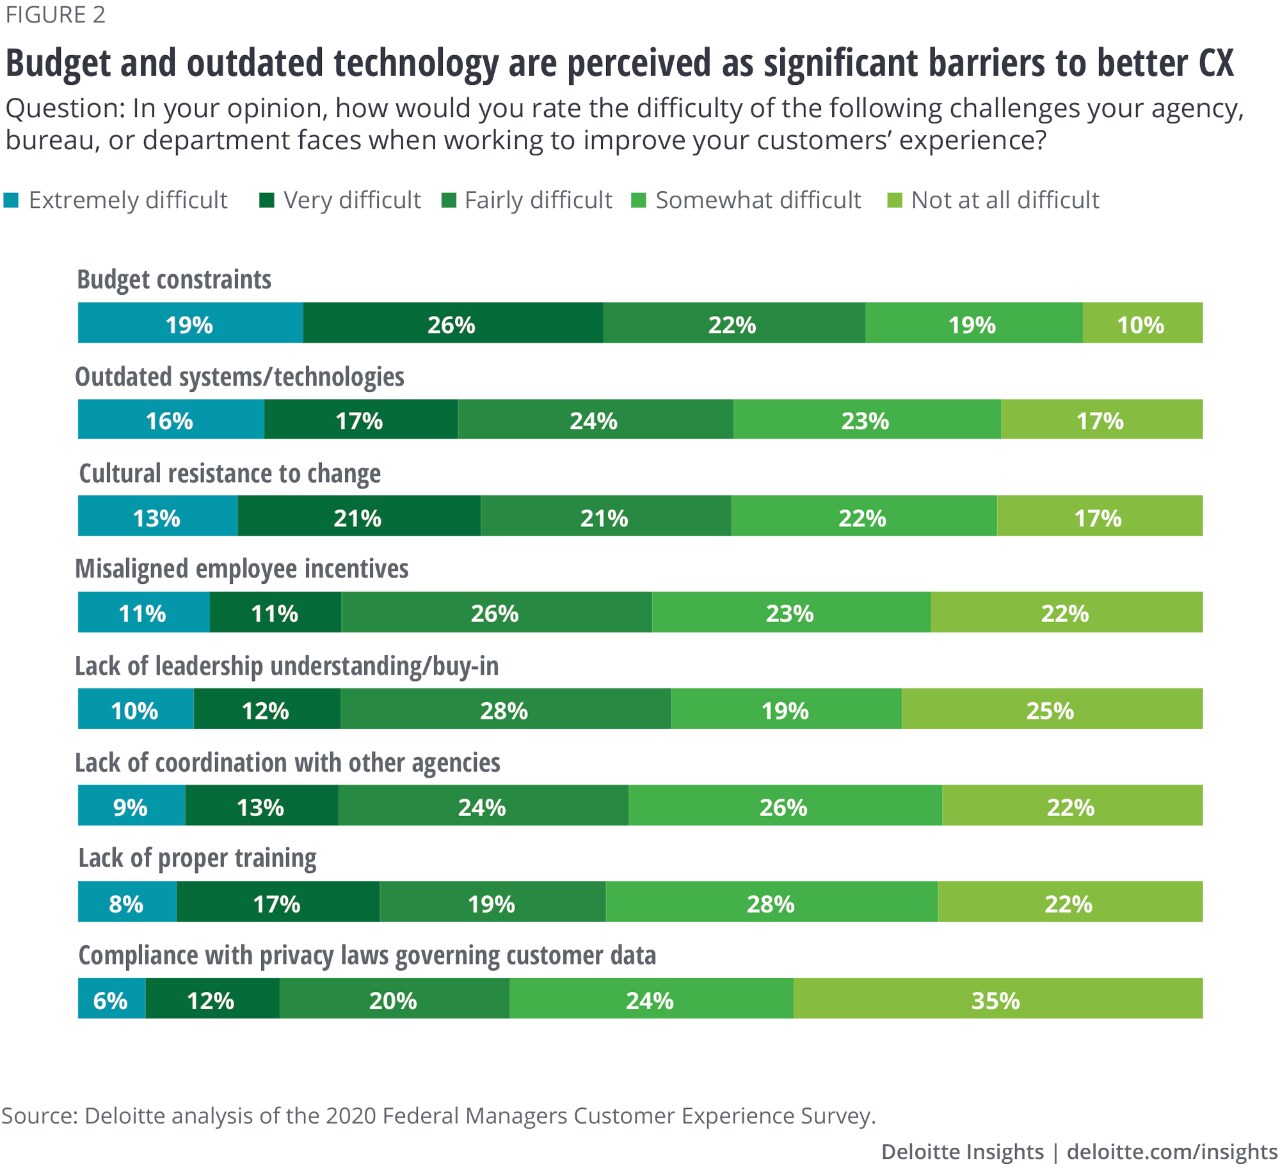 Figure 2. Budget and outdated technology are perceived as significant barriers to better CX